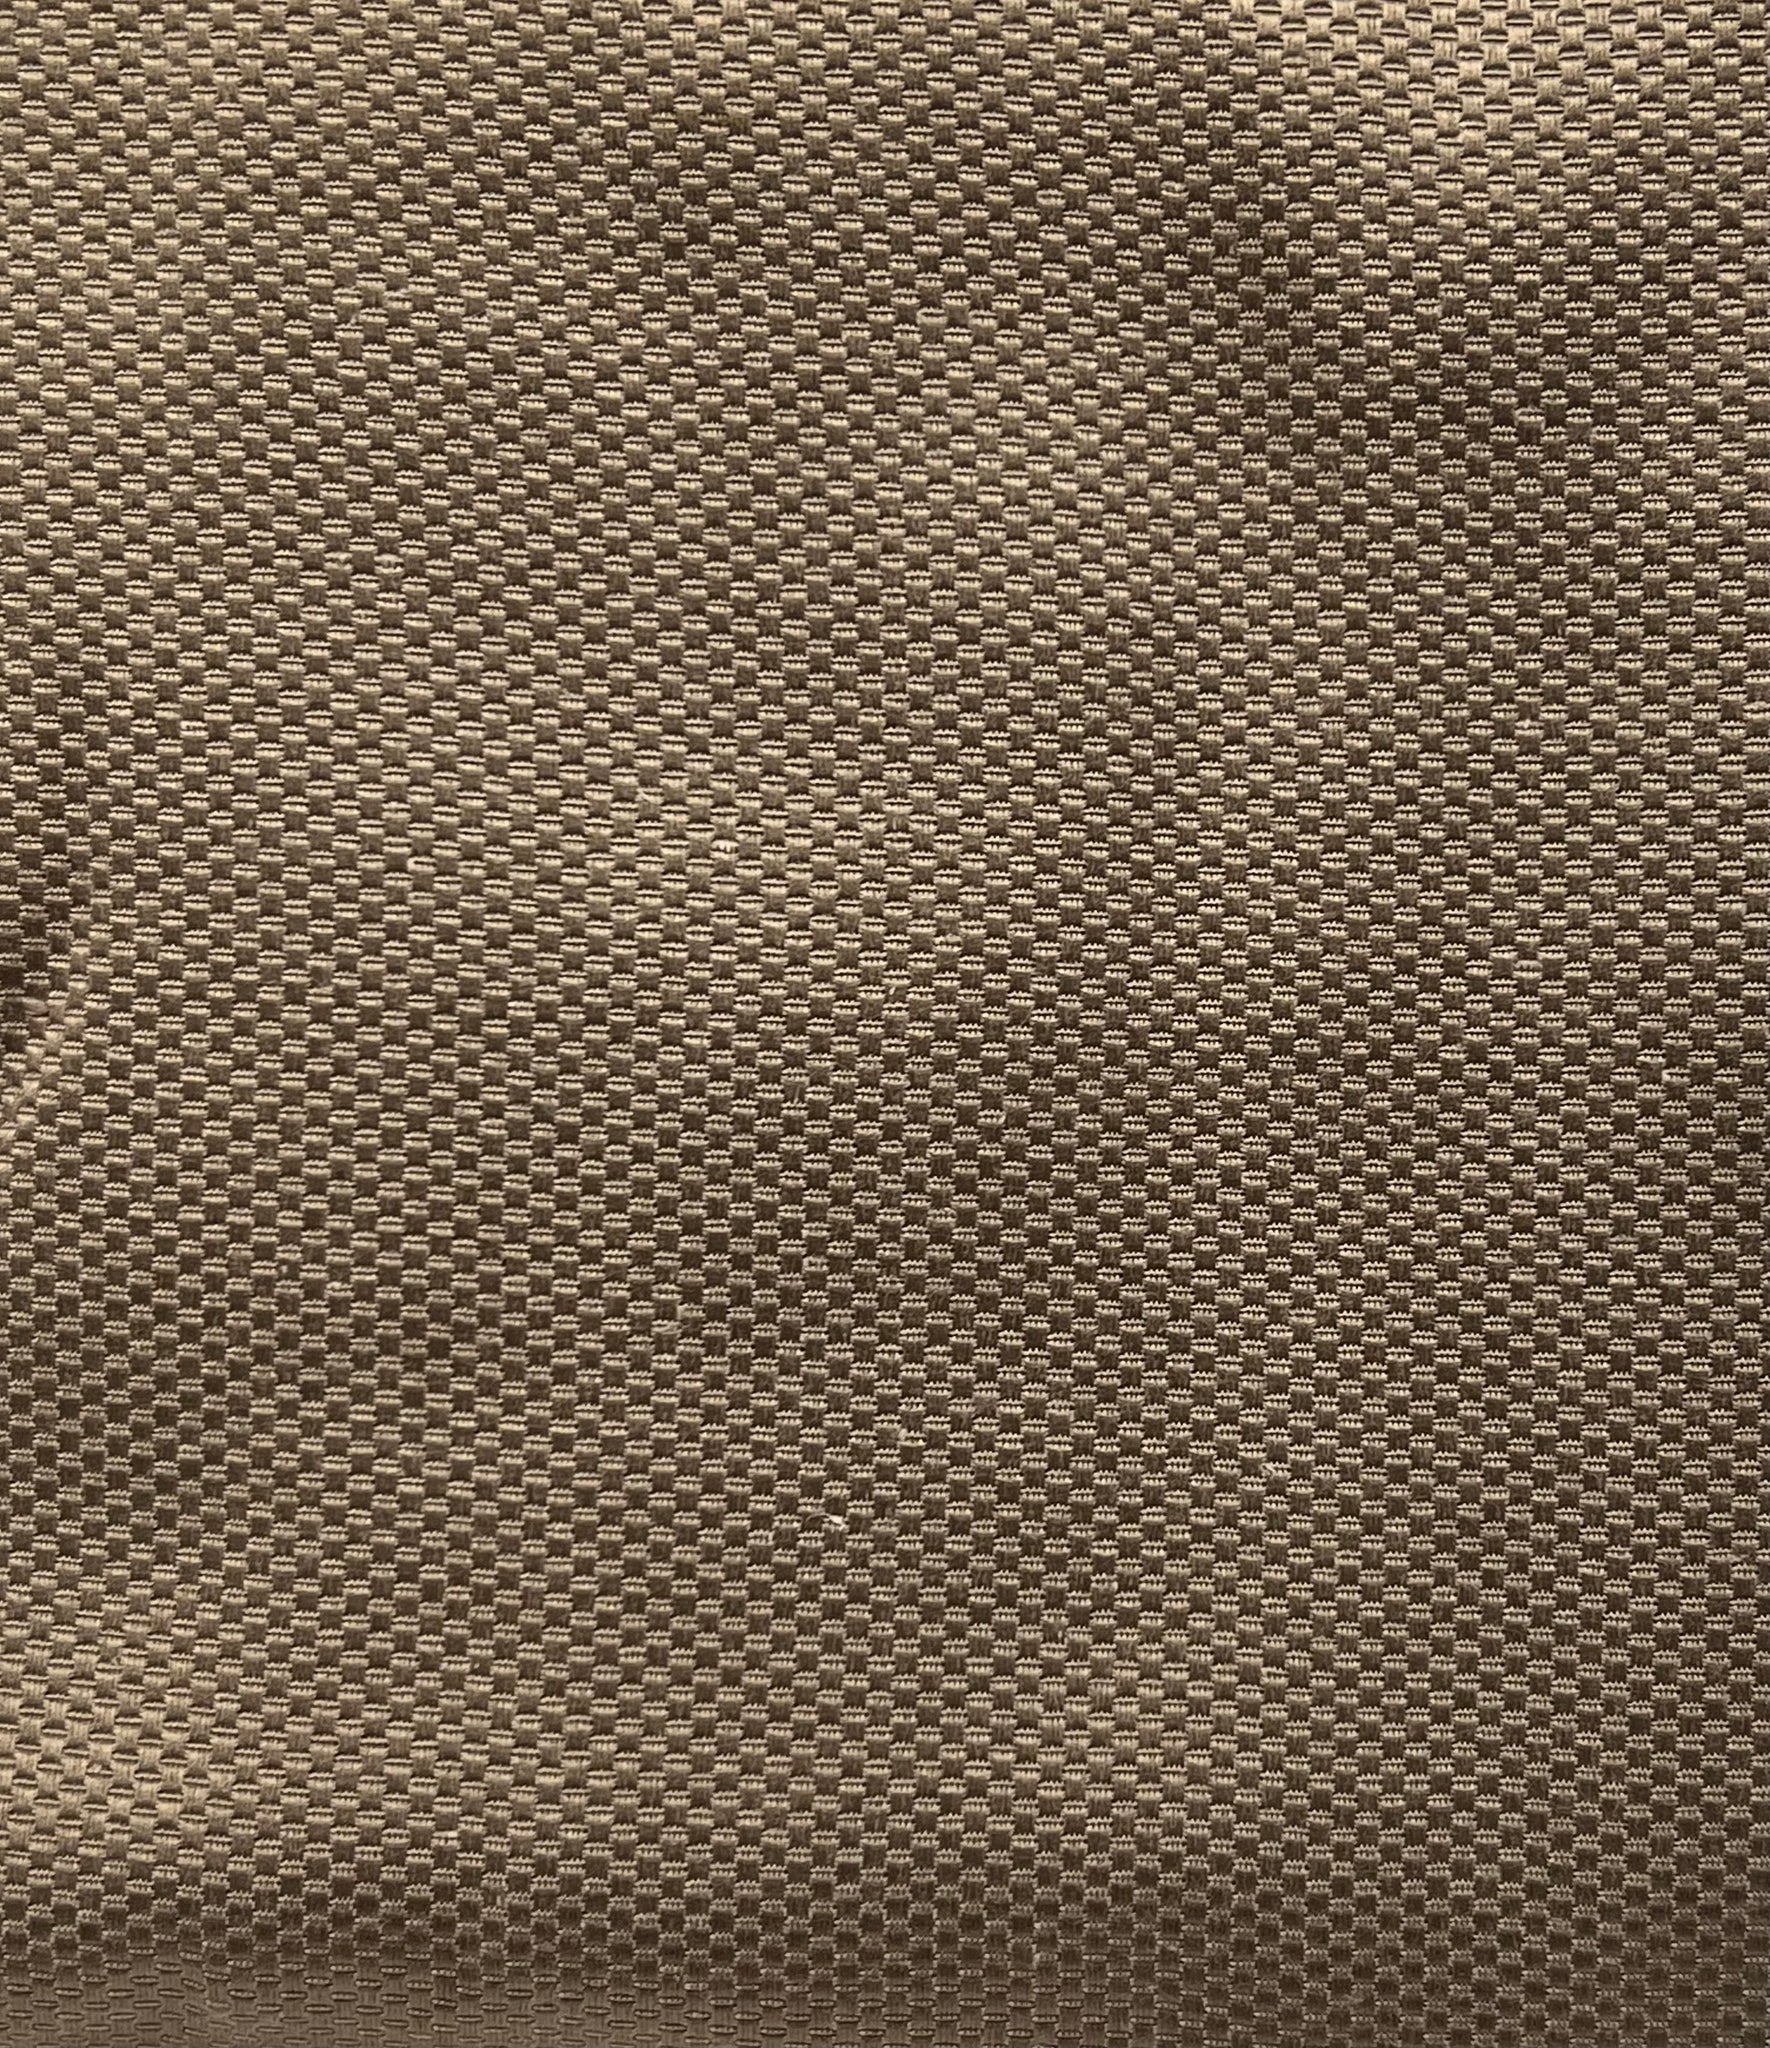 Table Cloth -Basket Weave -Taupe